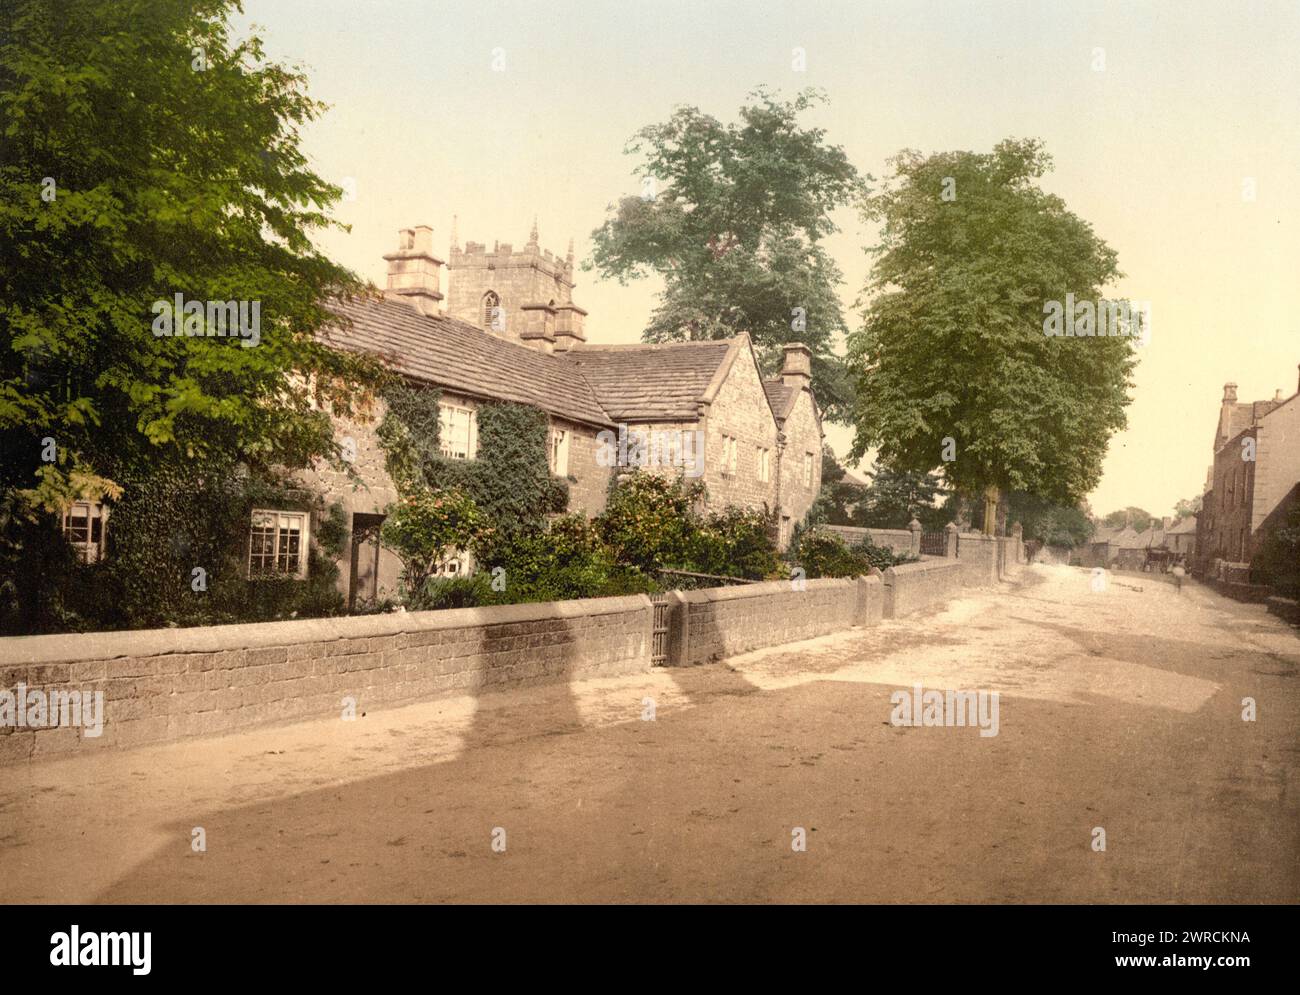 Eyam Plague Cottages, Derbyshire, England, between ca. 1890 and ca. 1900., England, Derbyshire, Color, 1890-1900 Stock Photo